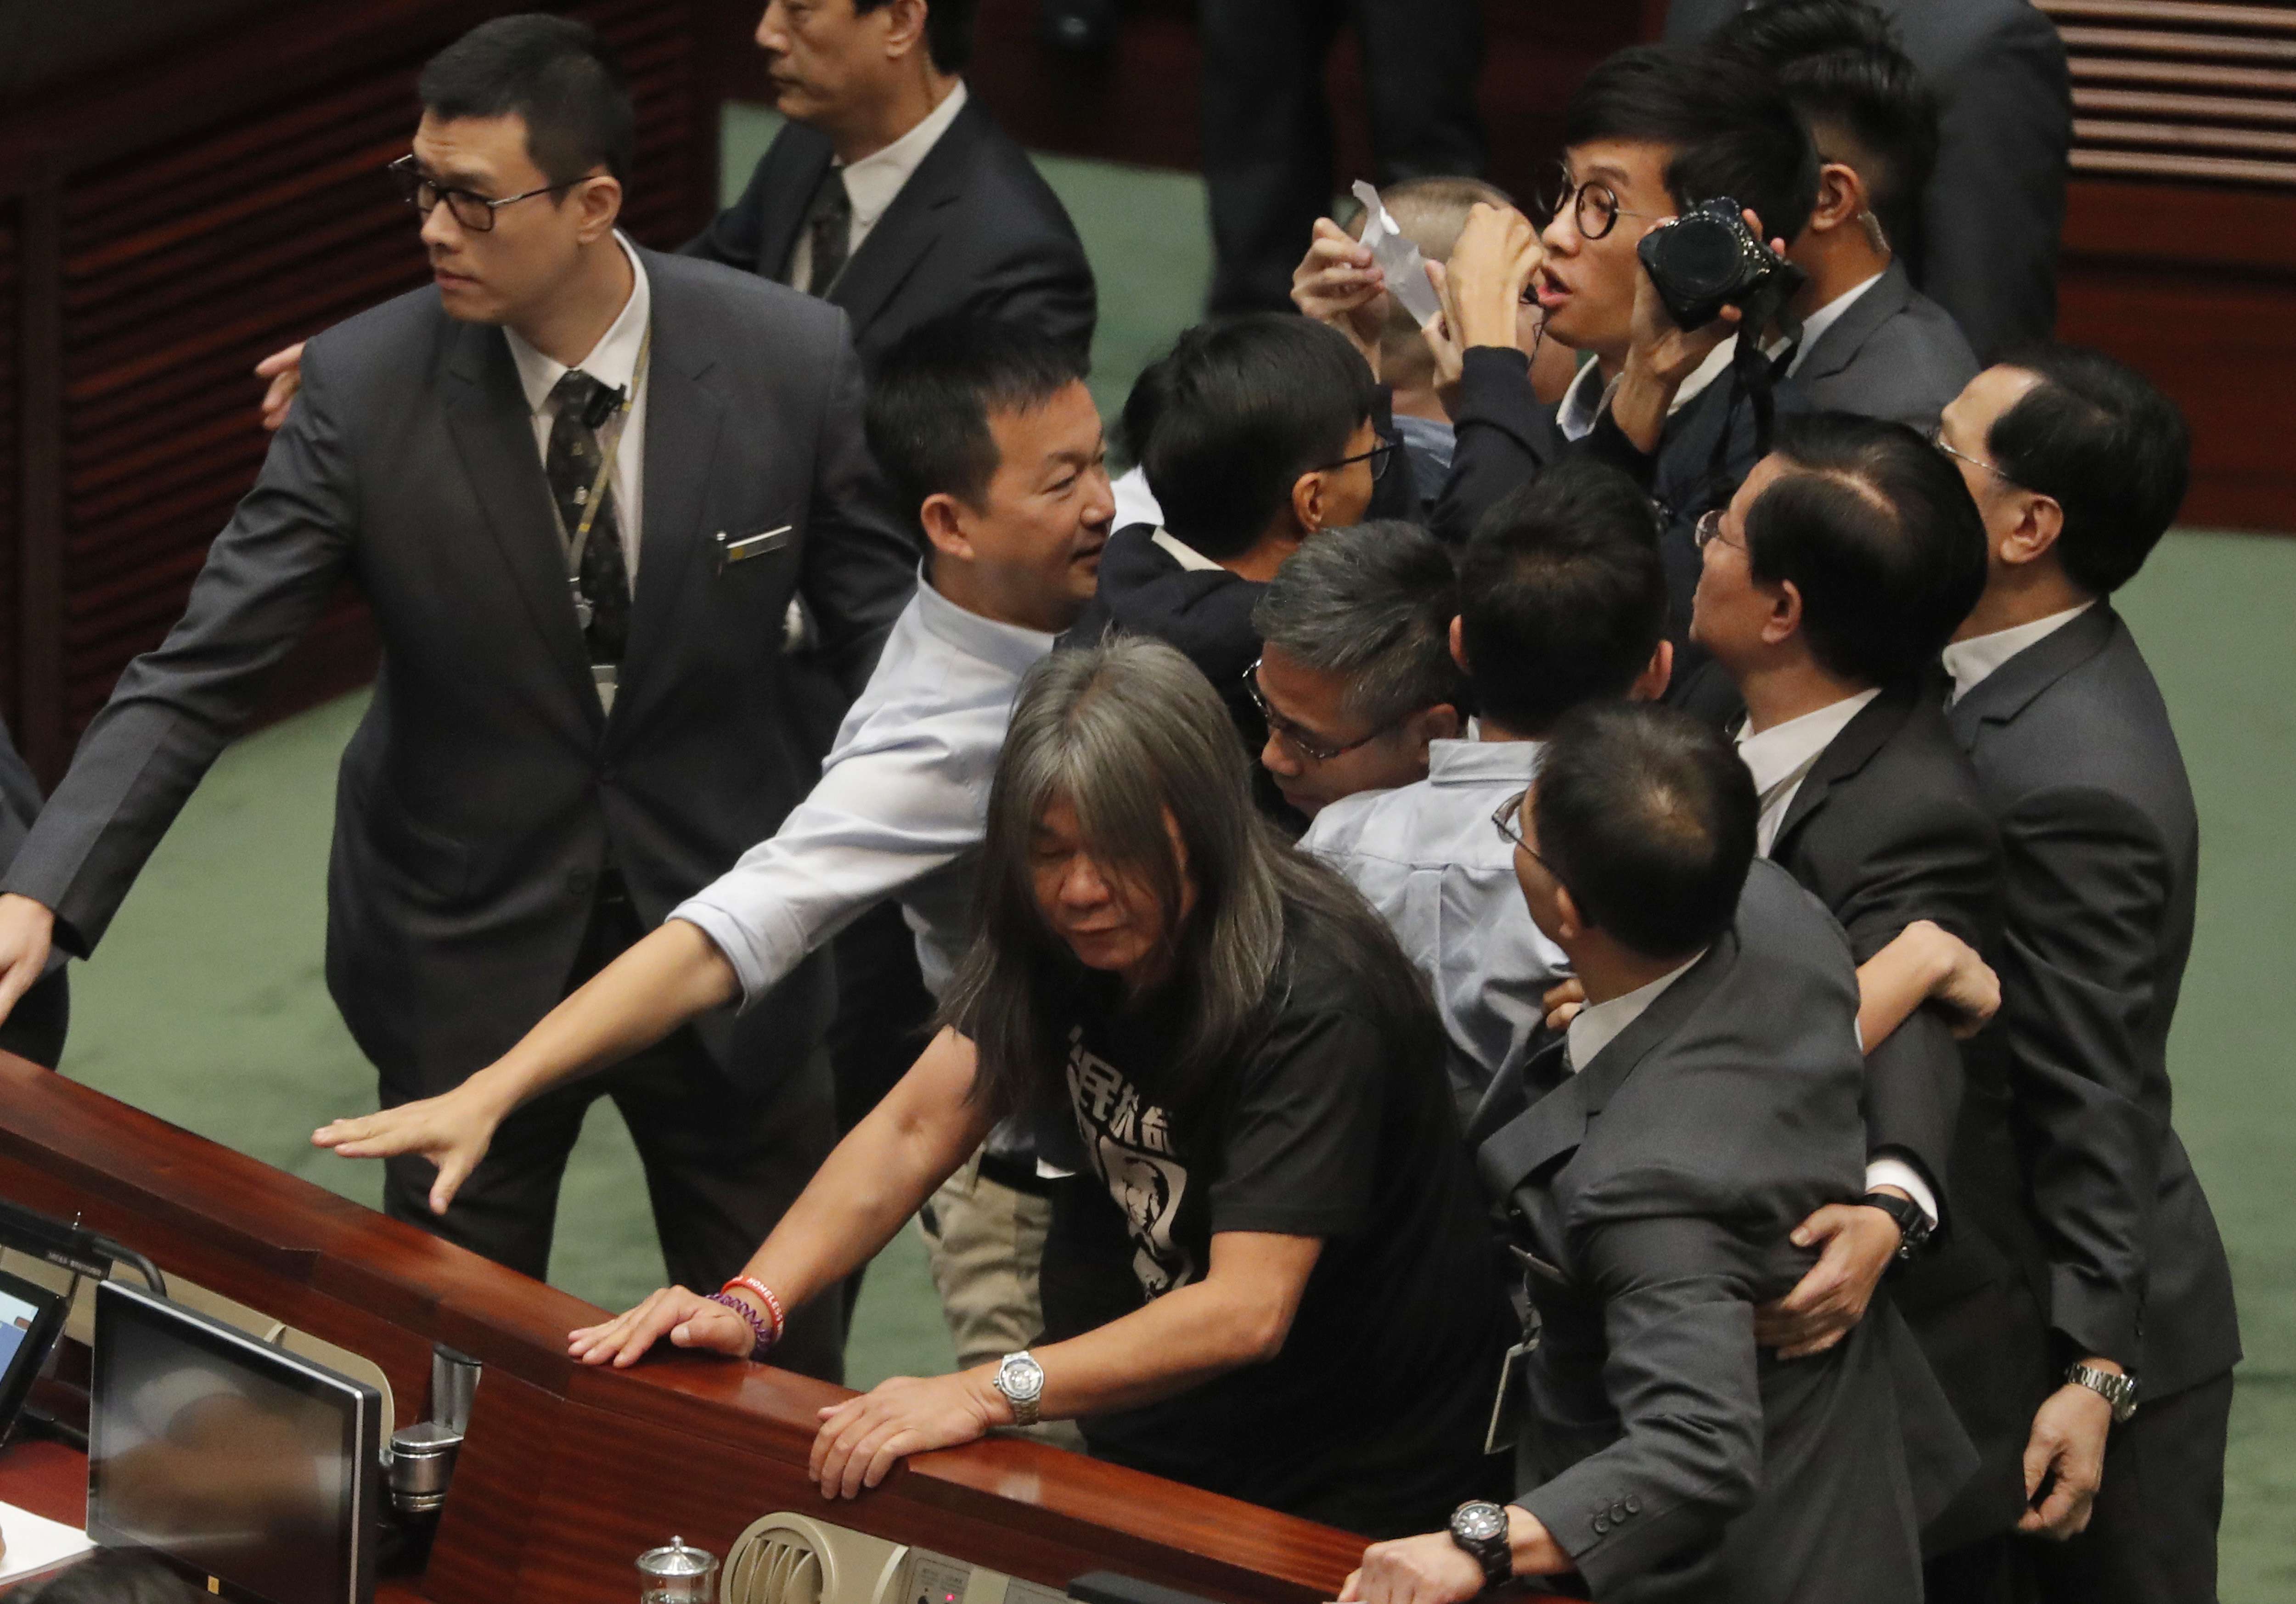 Pan-democrats join the scrum amid scuffles with Legislative Council security guards as they try to prevent Sixtus Leung (centre, holding a piece of paper) from retaking his oath on November 2. Photo: AP